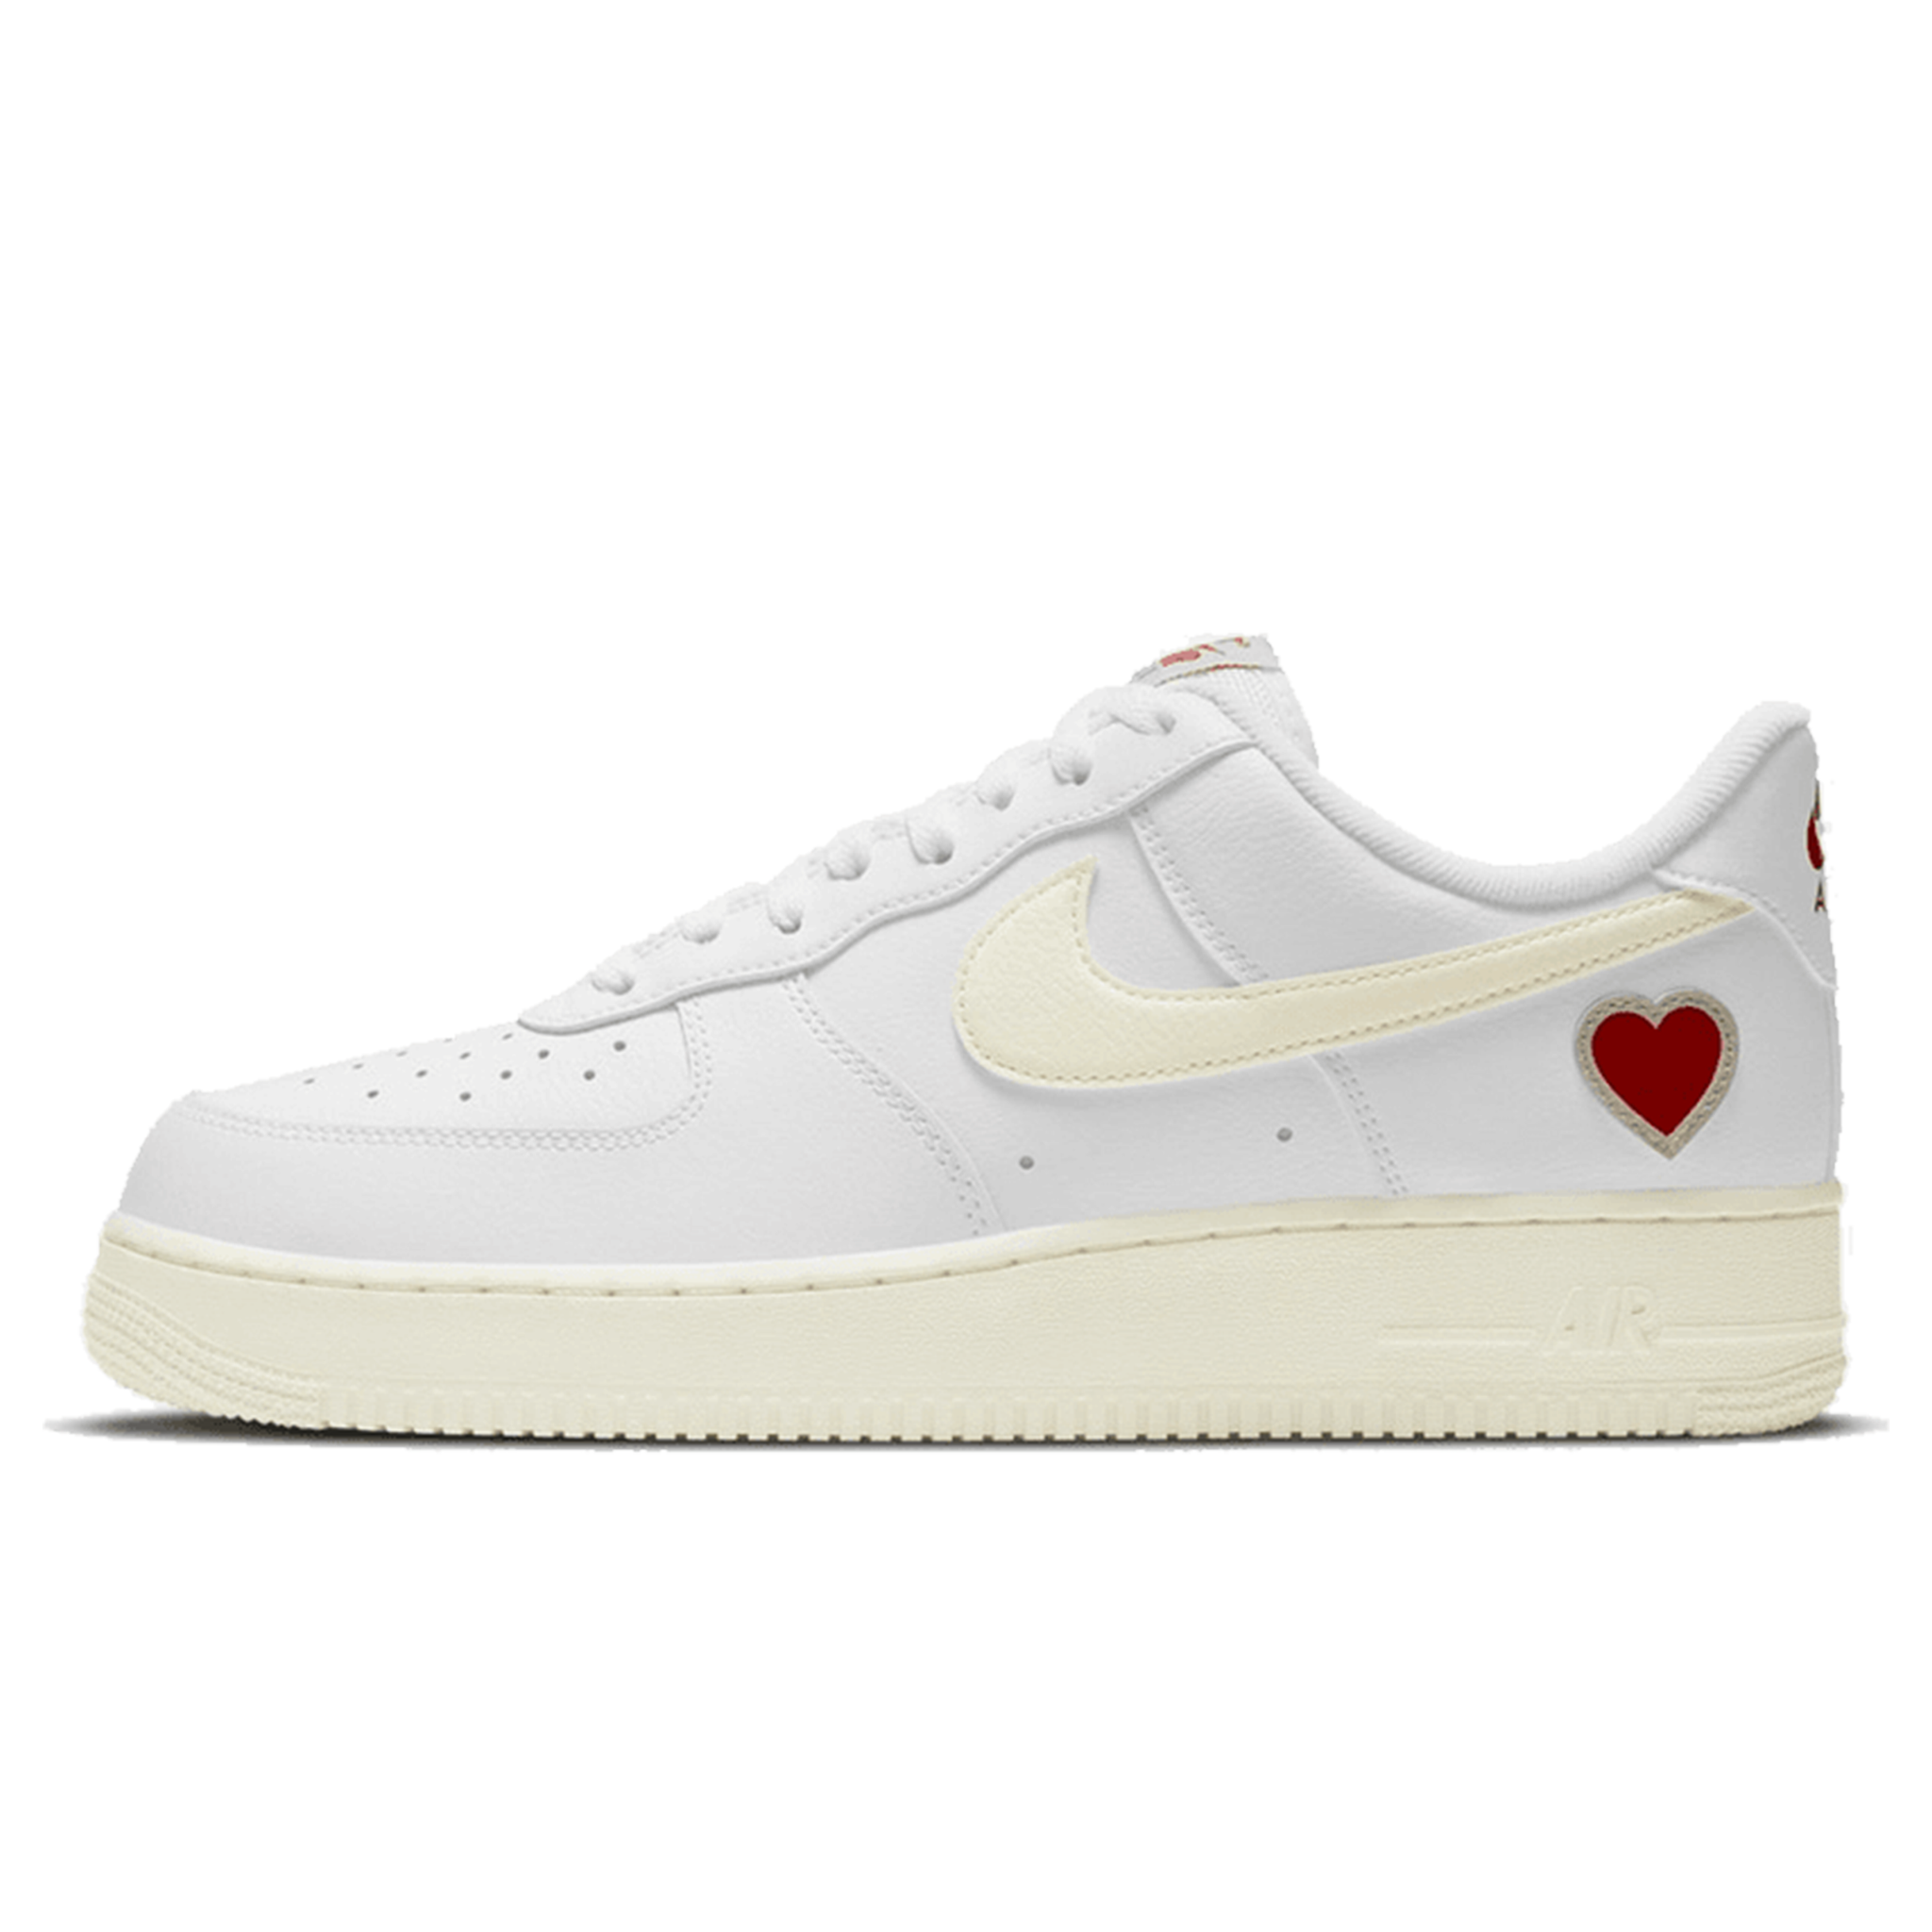 Nike Air Force 1 Low "Valentine's Day 2021"